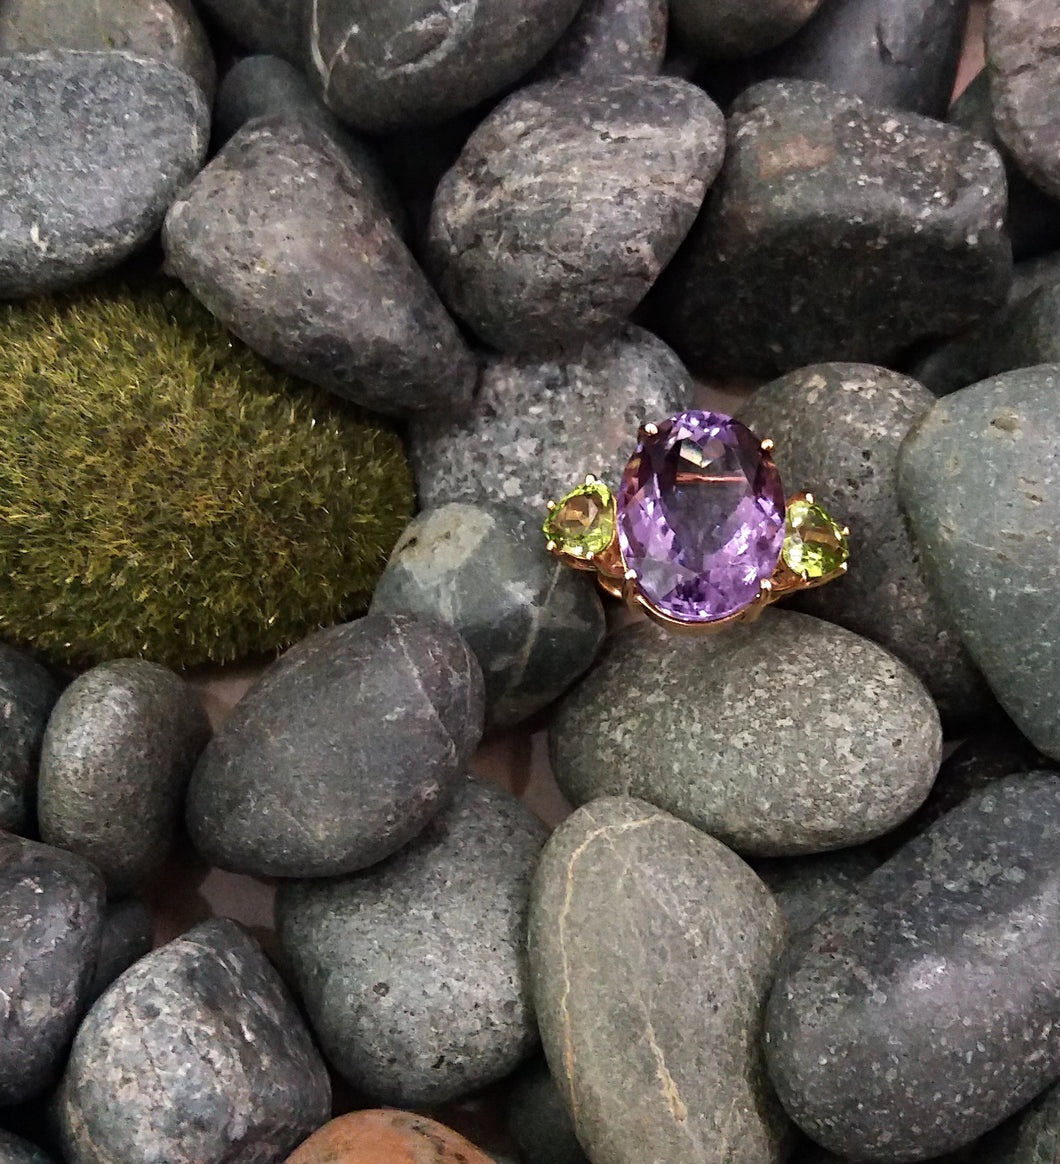 Oval Amethyst with Heart shaped Peridot sidestones Cocktail Ring